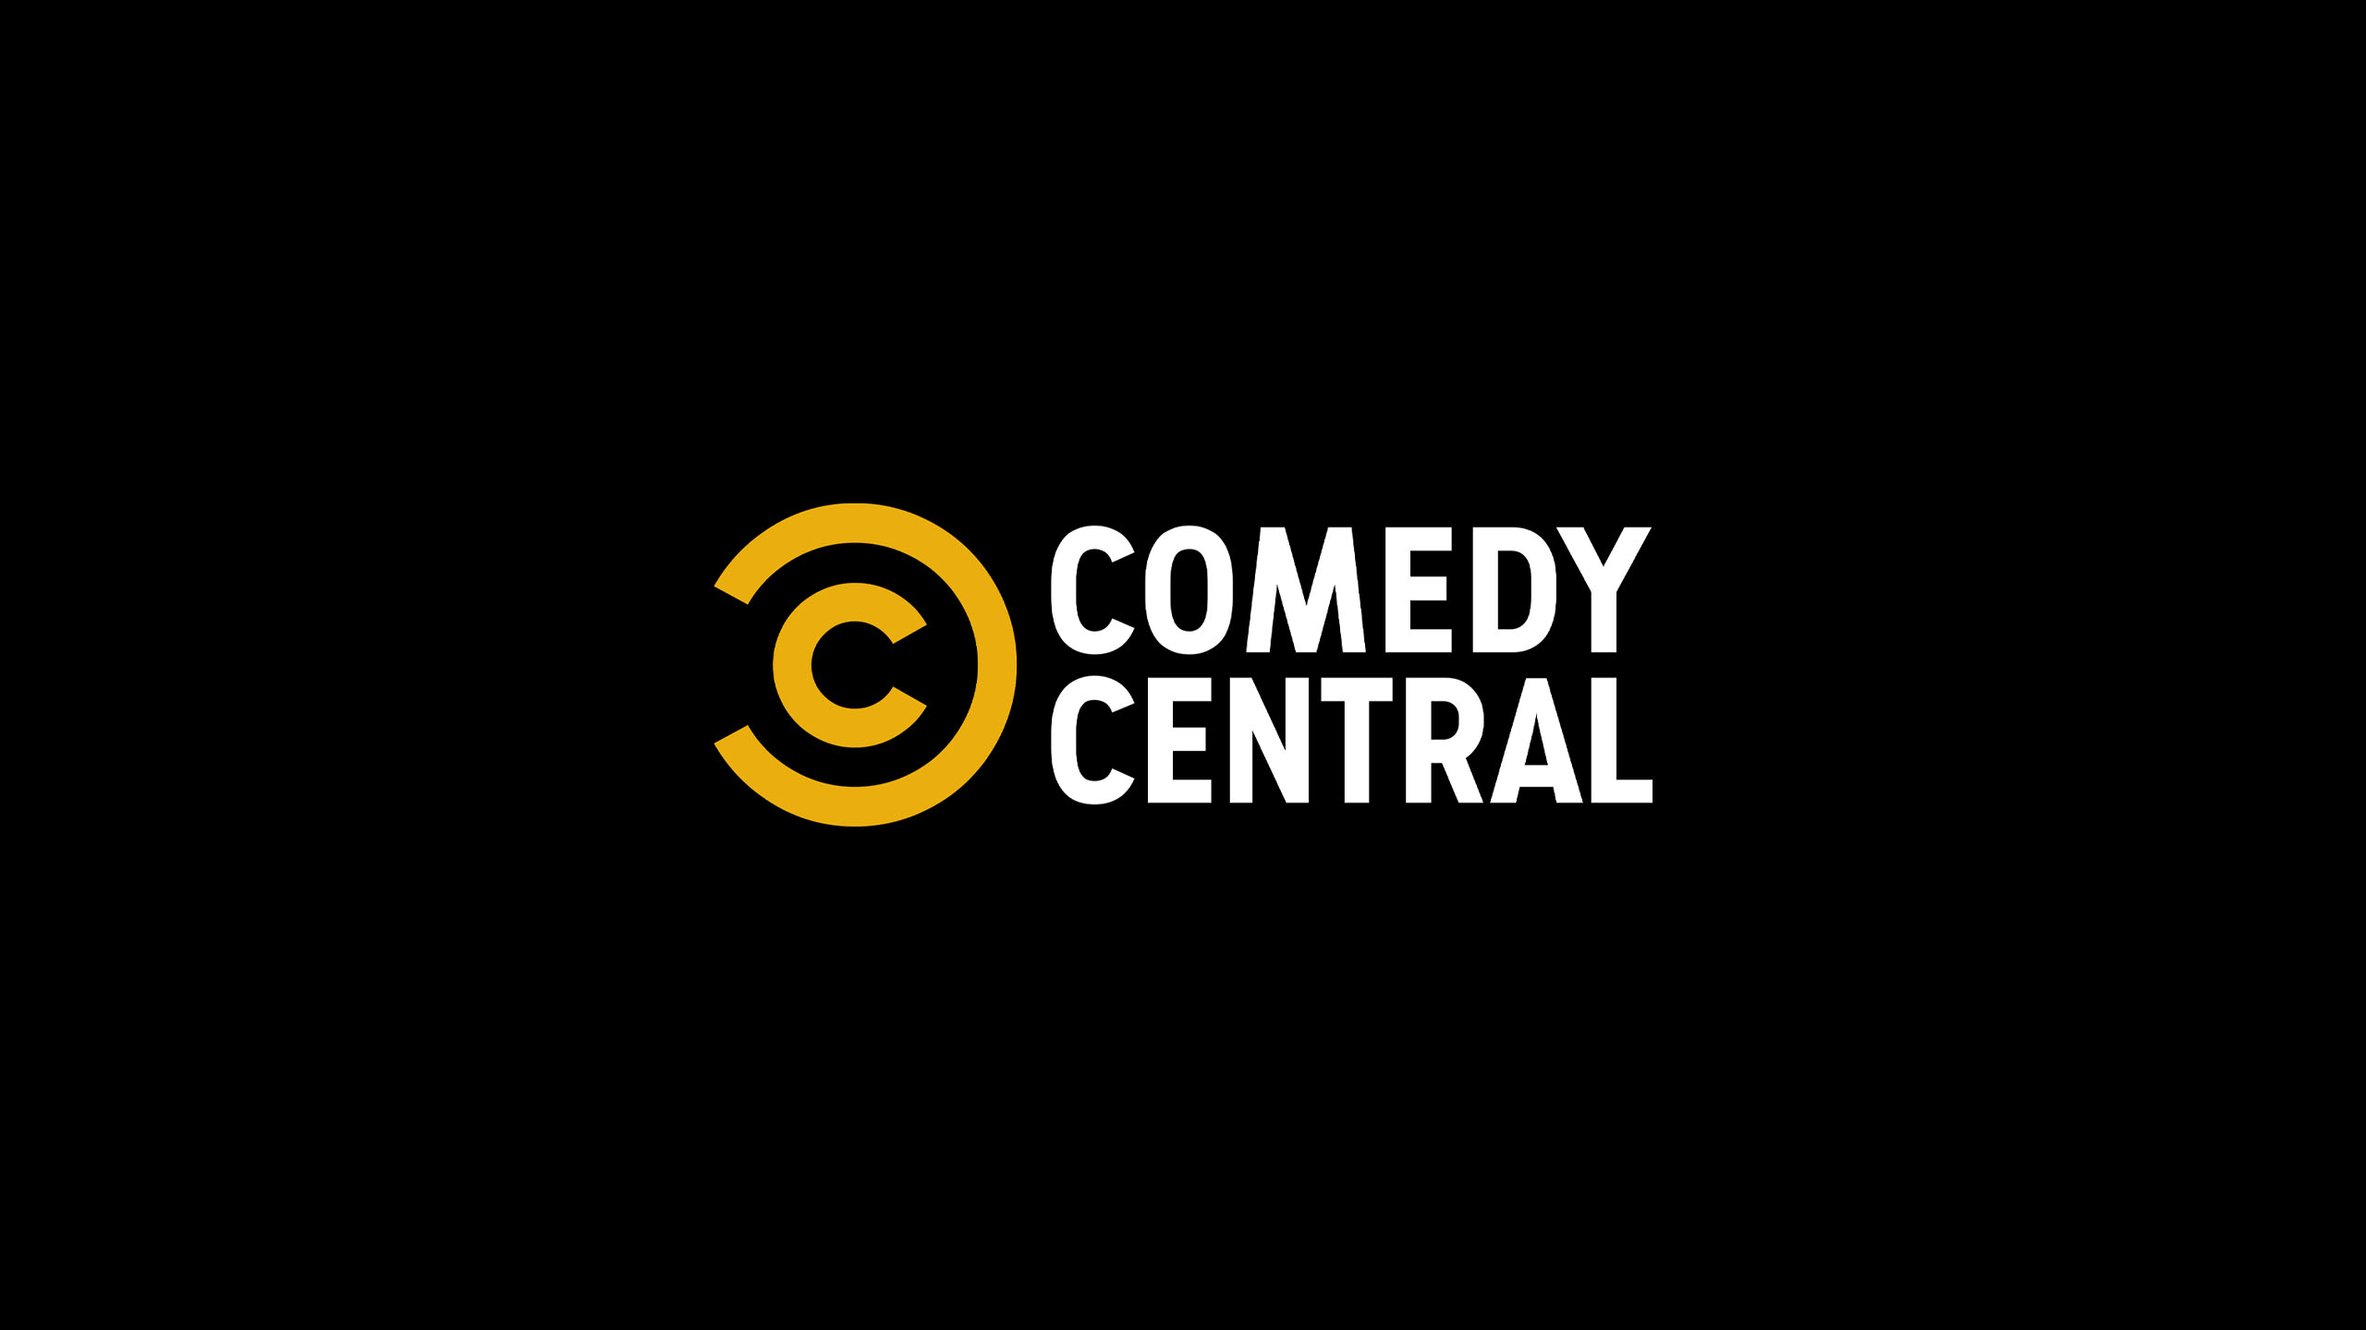 Casting Stand-ins For Comedy Central!